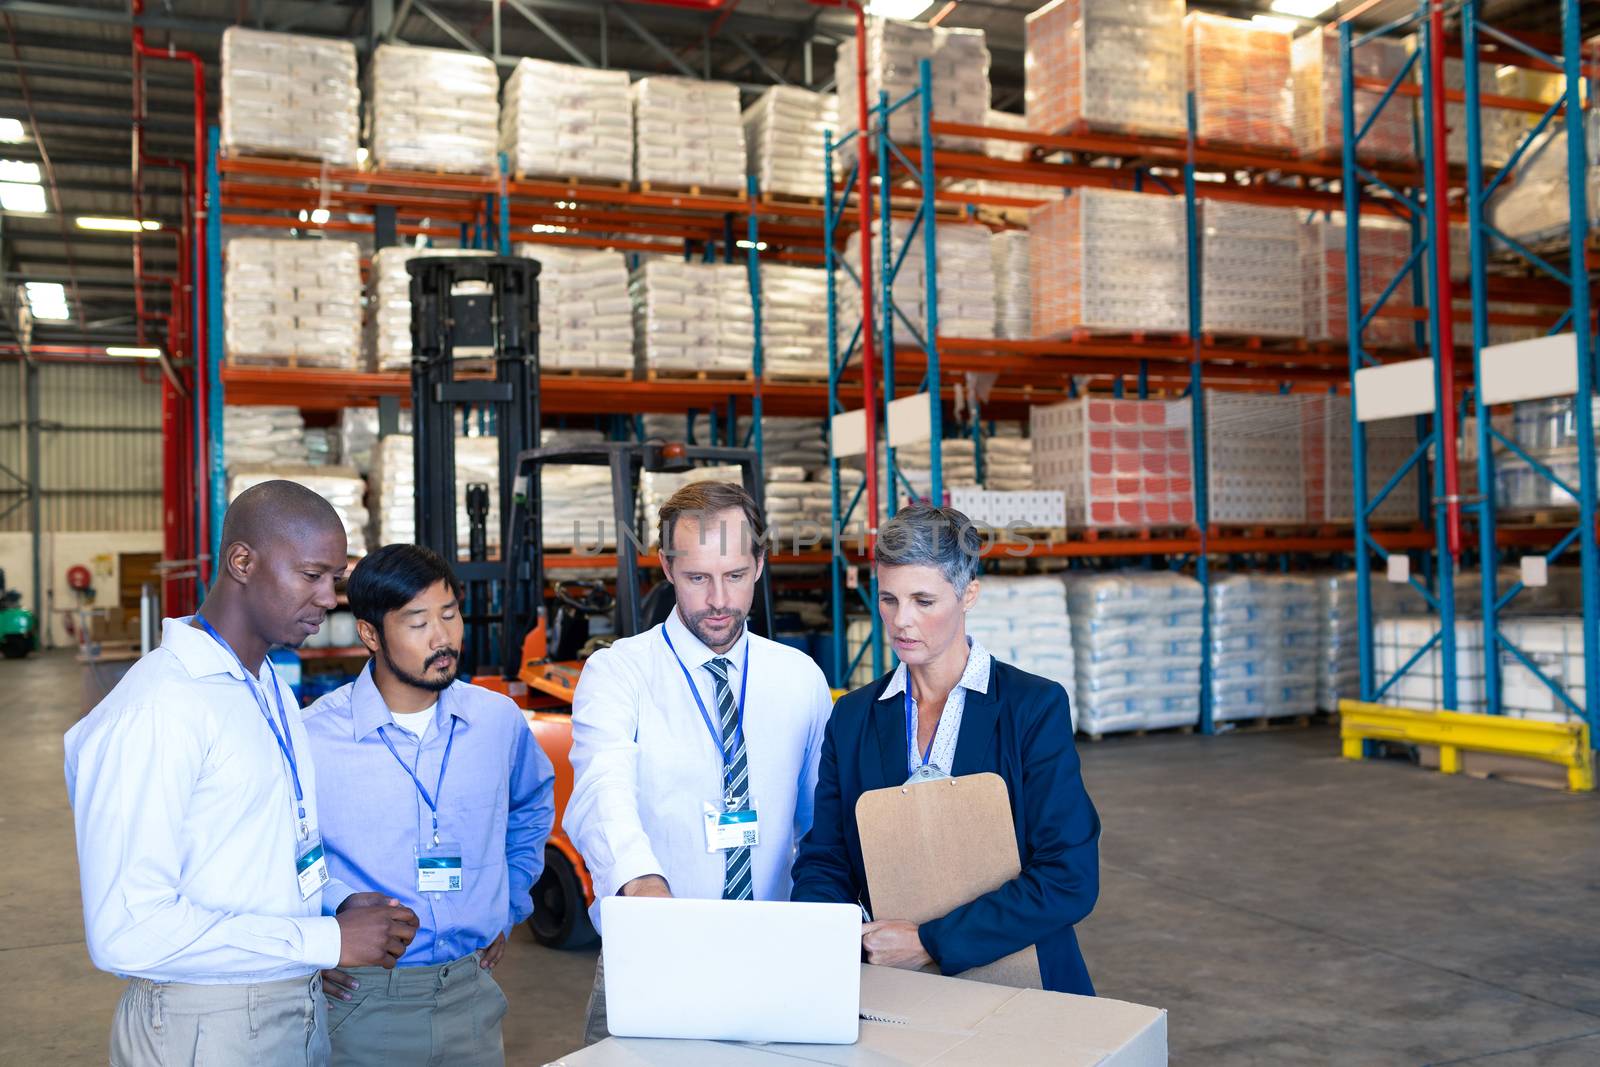 Warehouse staff discussing over laptop in warehouse by Wavebreakmedia